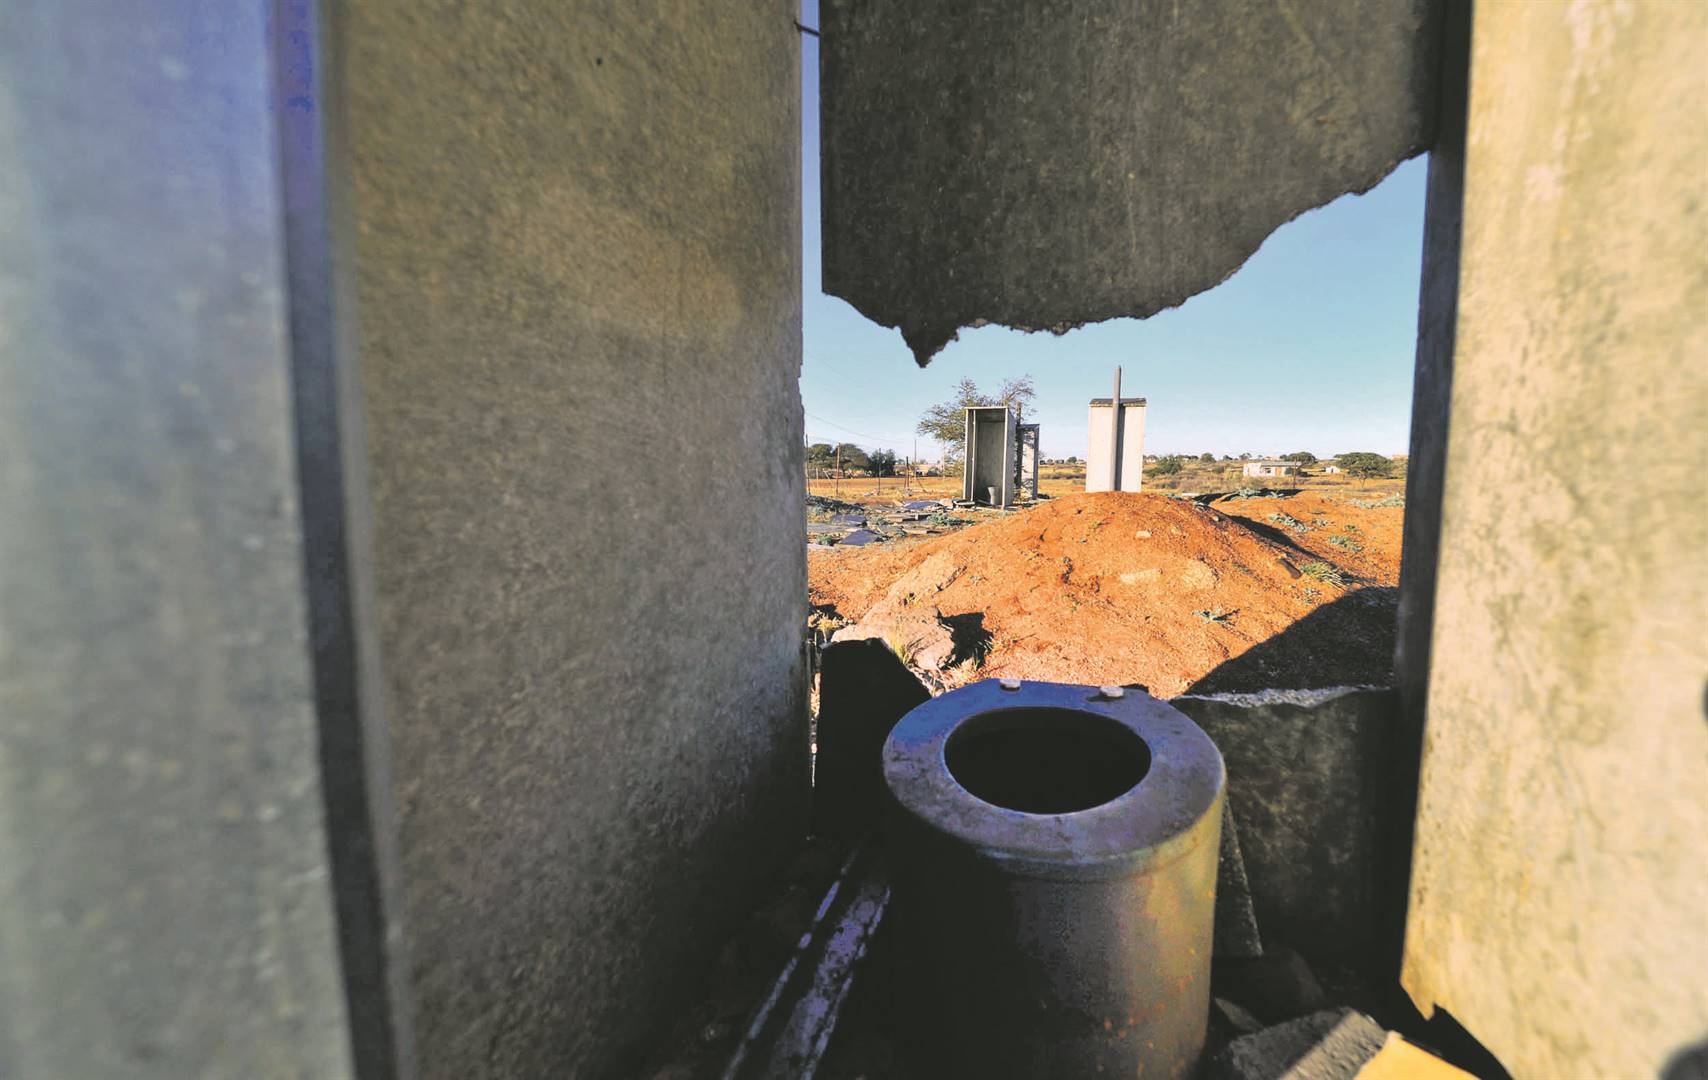 Pupils in schools across the country are forced to use dilapidated and dangerous pit latrines to relieve themselves. School infrastructure has not improved and the department appears to be trying to avoid its own standards. Photo: Leon Sadiki